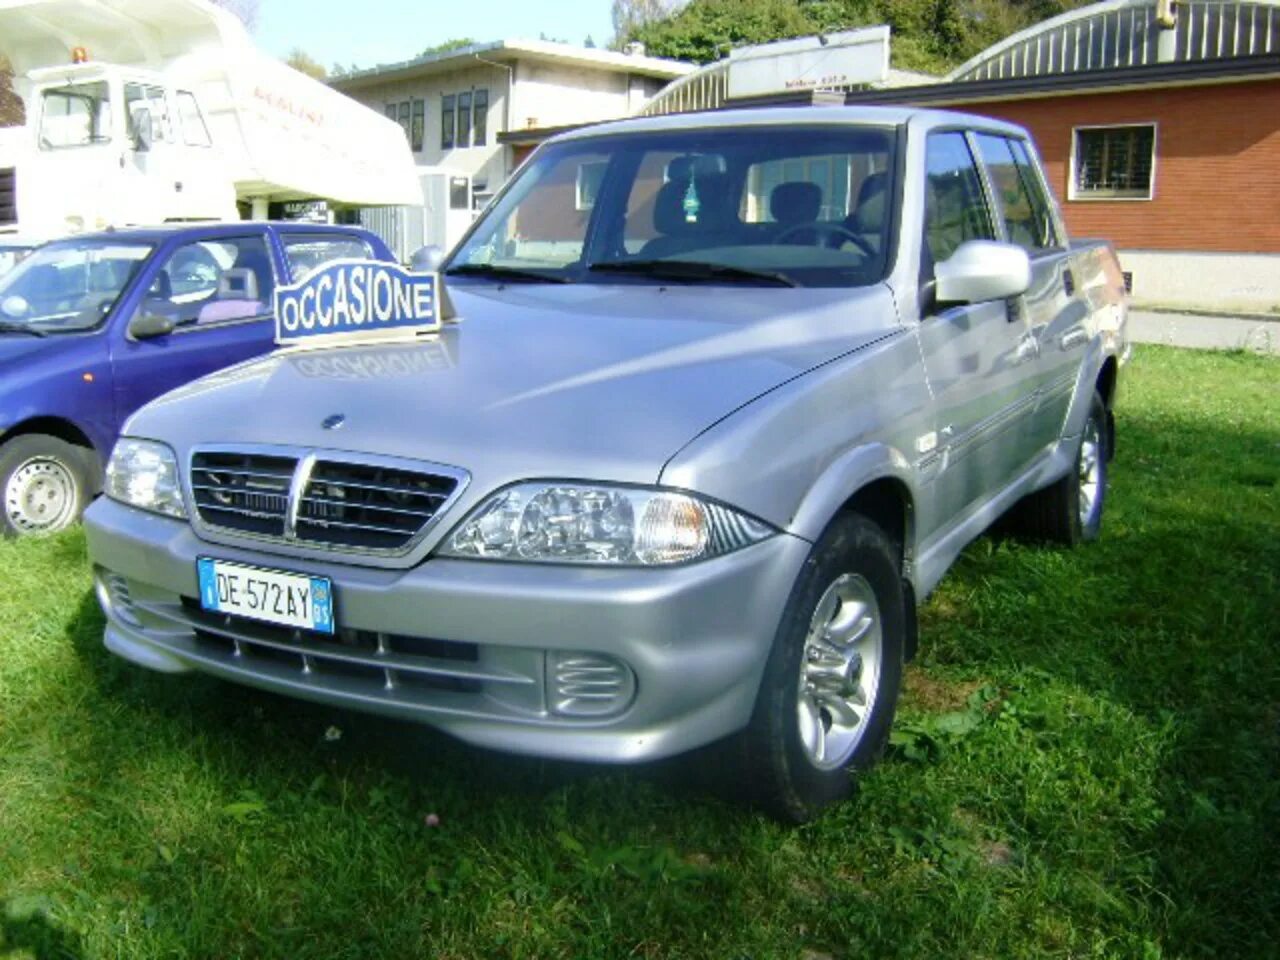 Ssangyong musso sports. ССАНГЙОНГ Муссо спорт. SSANGYONG Musso Sports, 2003. SSANGYONG Musso 1999.